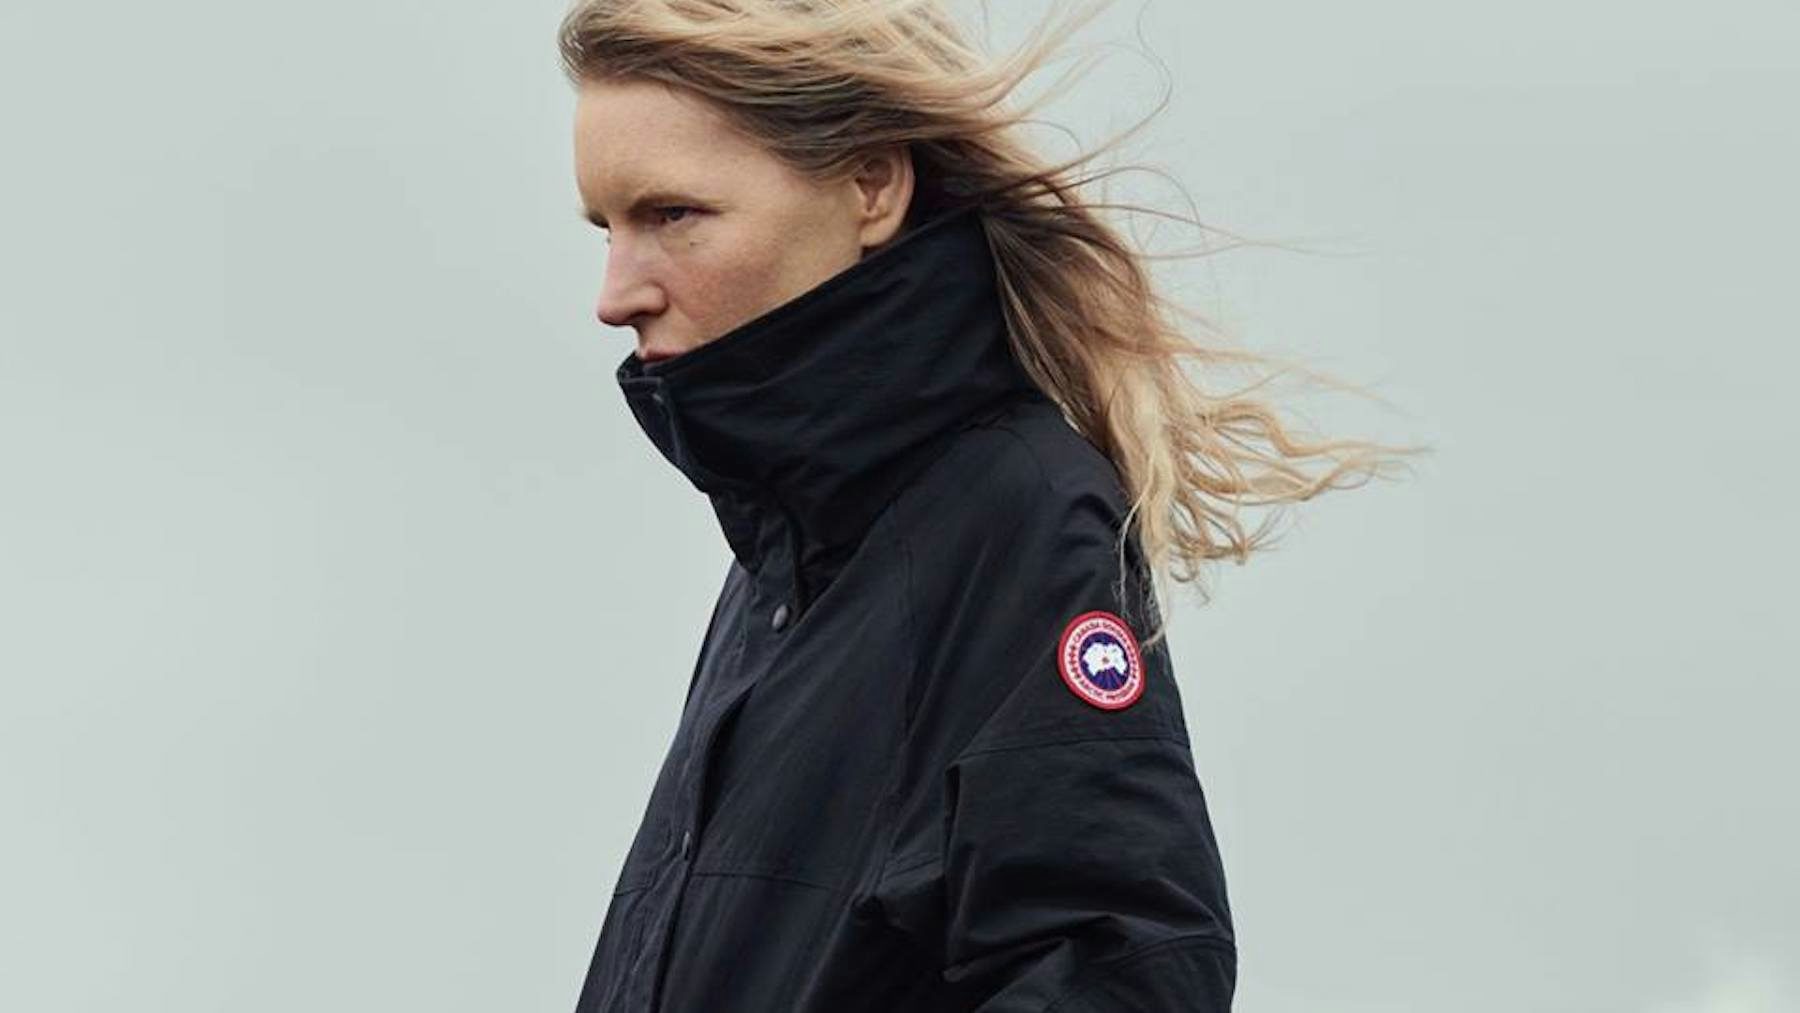 canada goose jackets used, Off 66%, www 